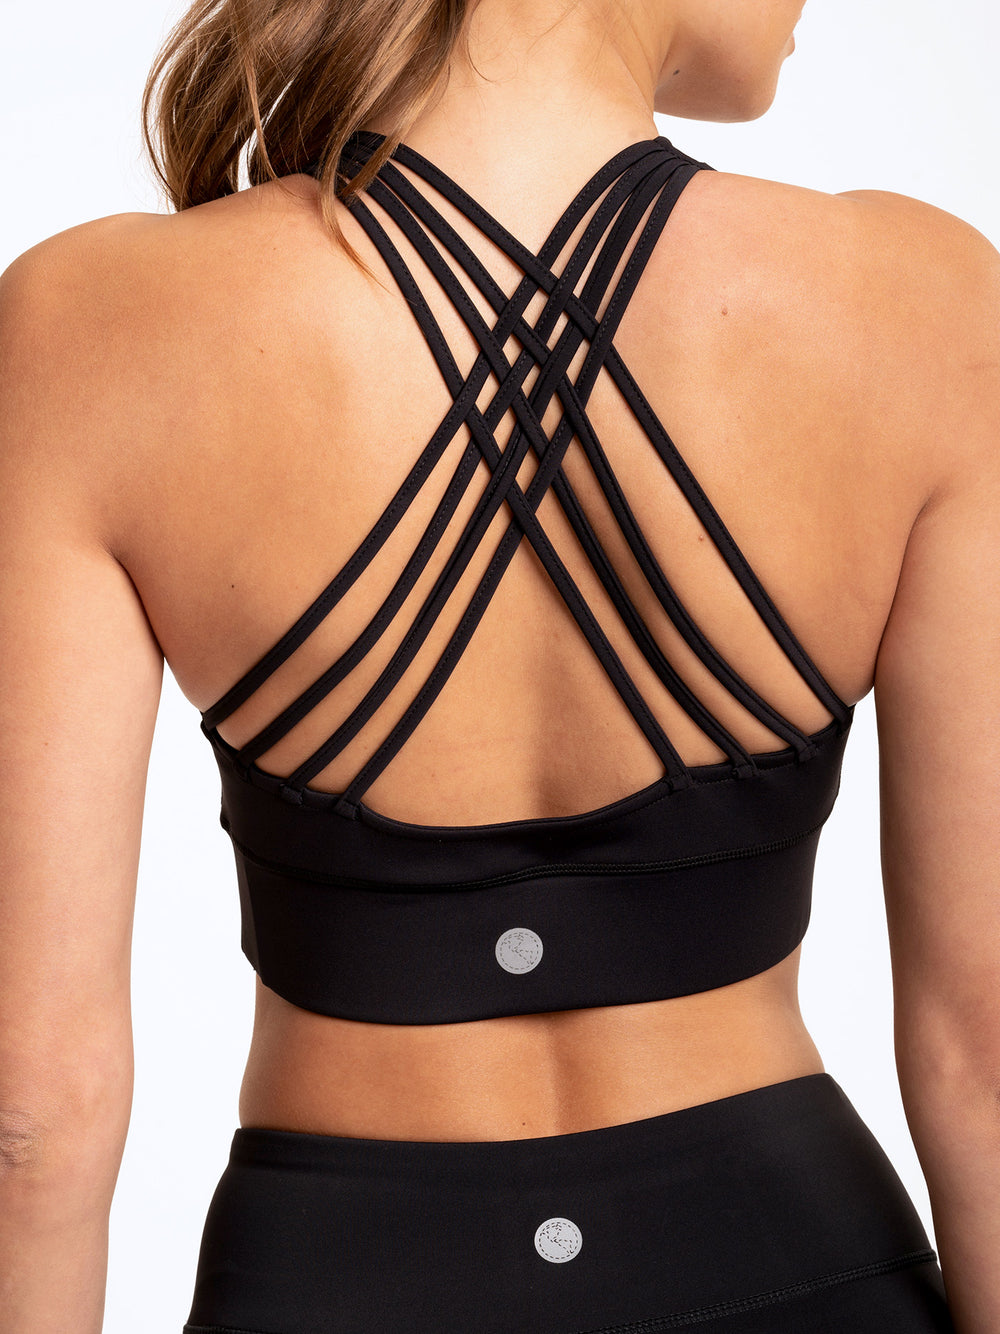 Threads 4 Thought bra, strappy sport